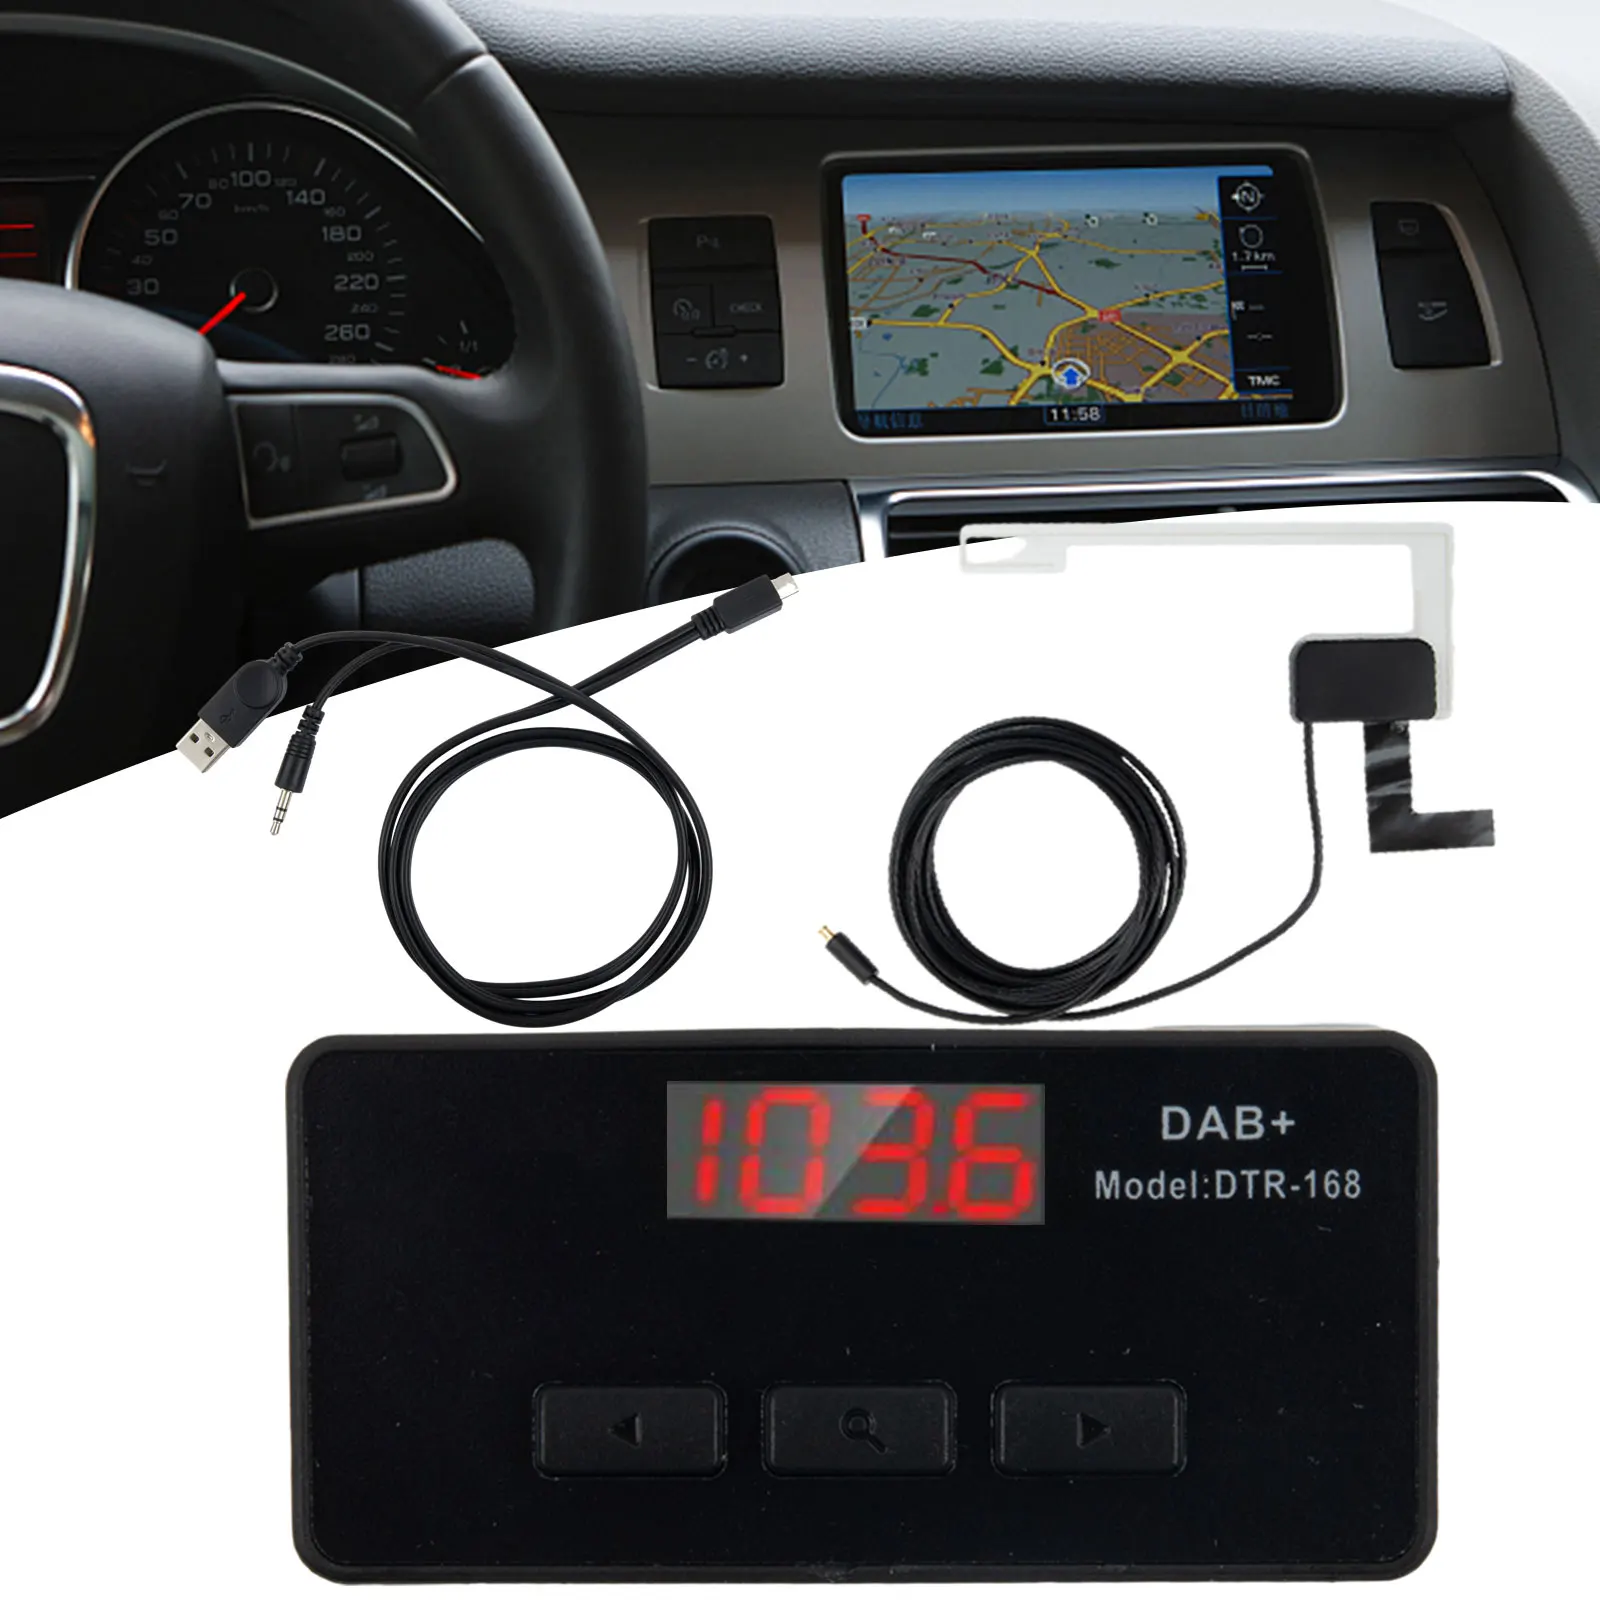 

Enjoy smooth and reliable audio transmissions with our DAB+ car radio receiver and FM transmitter complete with antenna